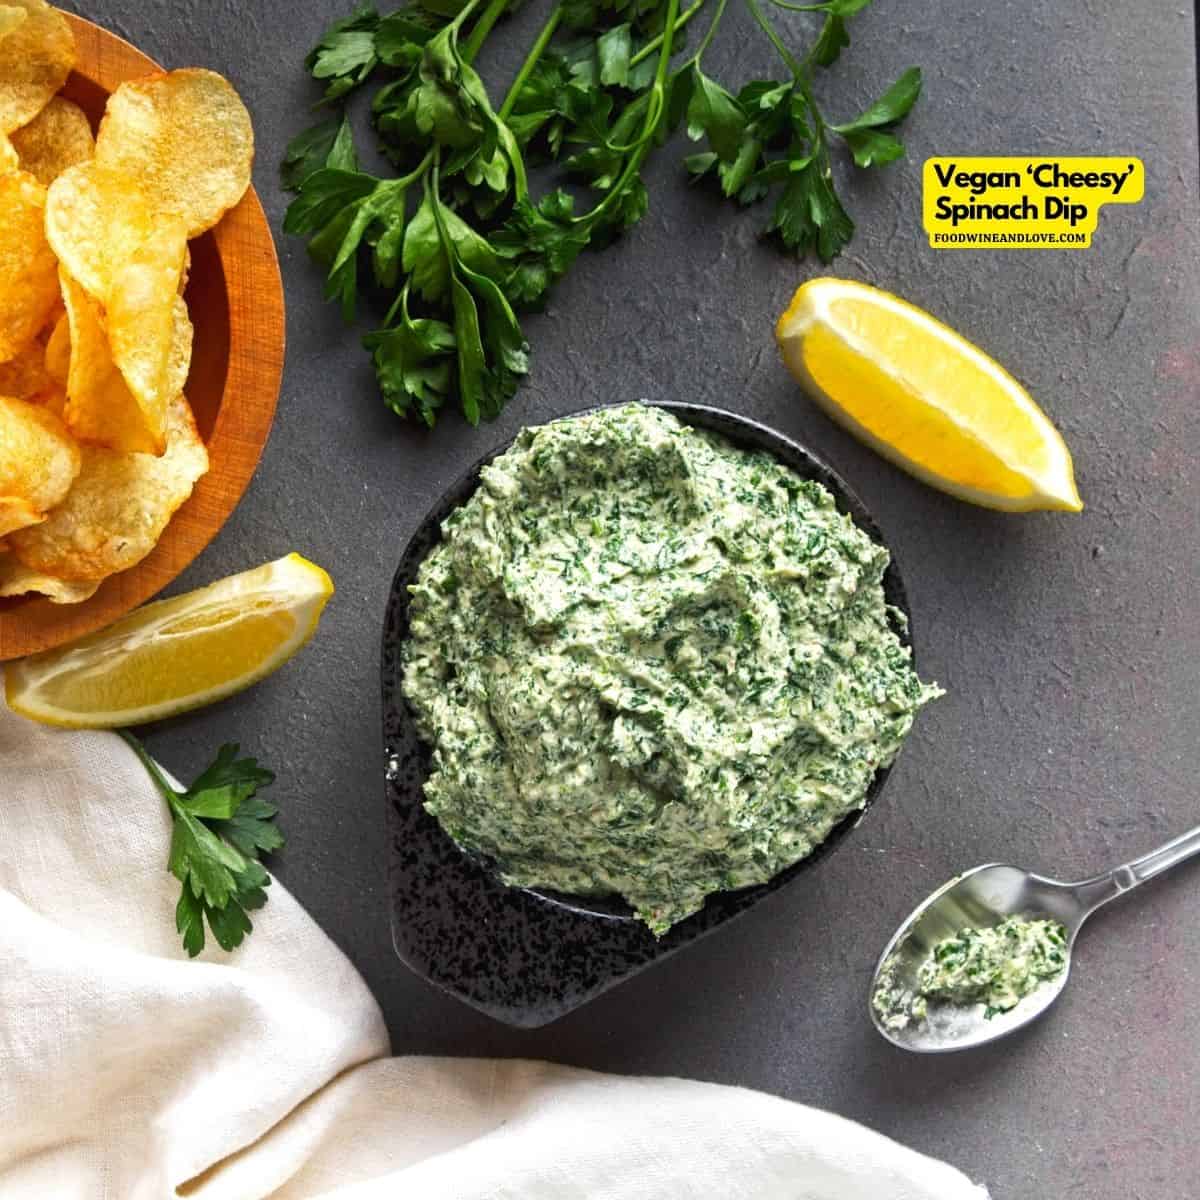 Vegan ‘Cheesy’ Spinach Dip, a simple appetizer recipe for a creamy flavorful dip made without added dairy ingredients. GF, Soy Free